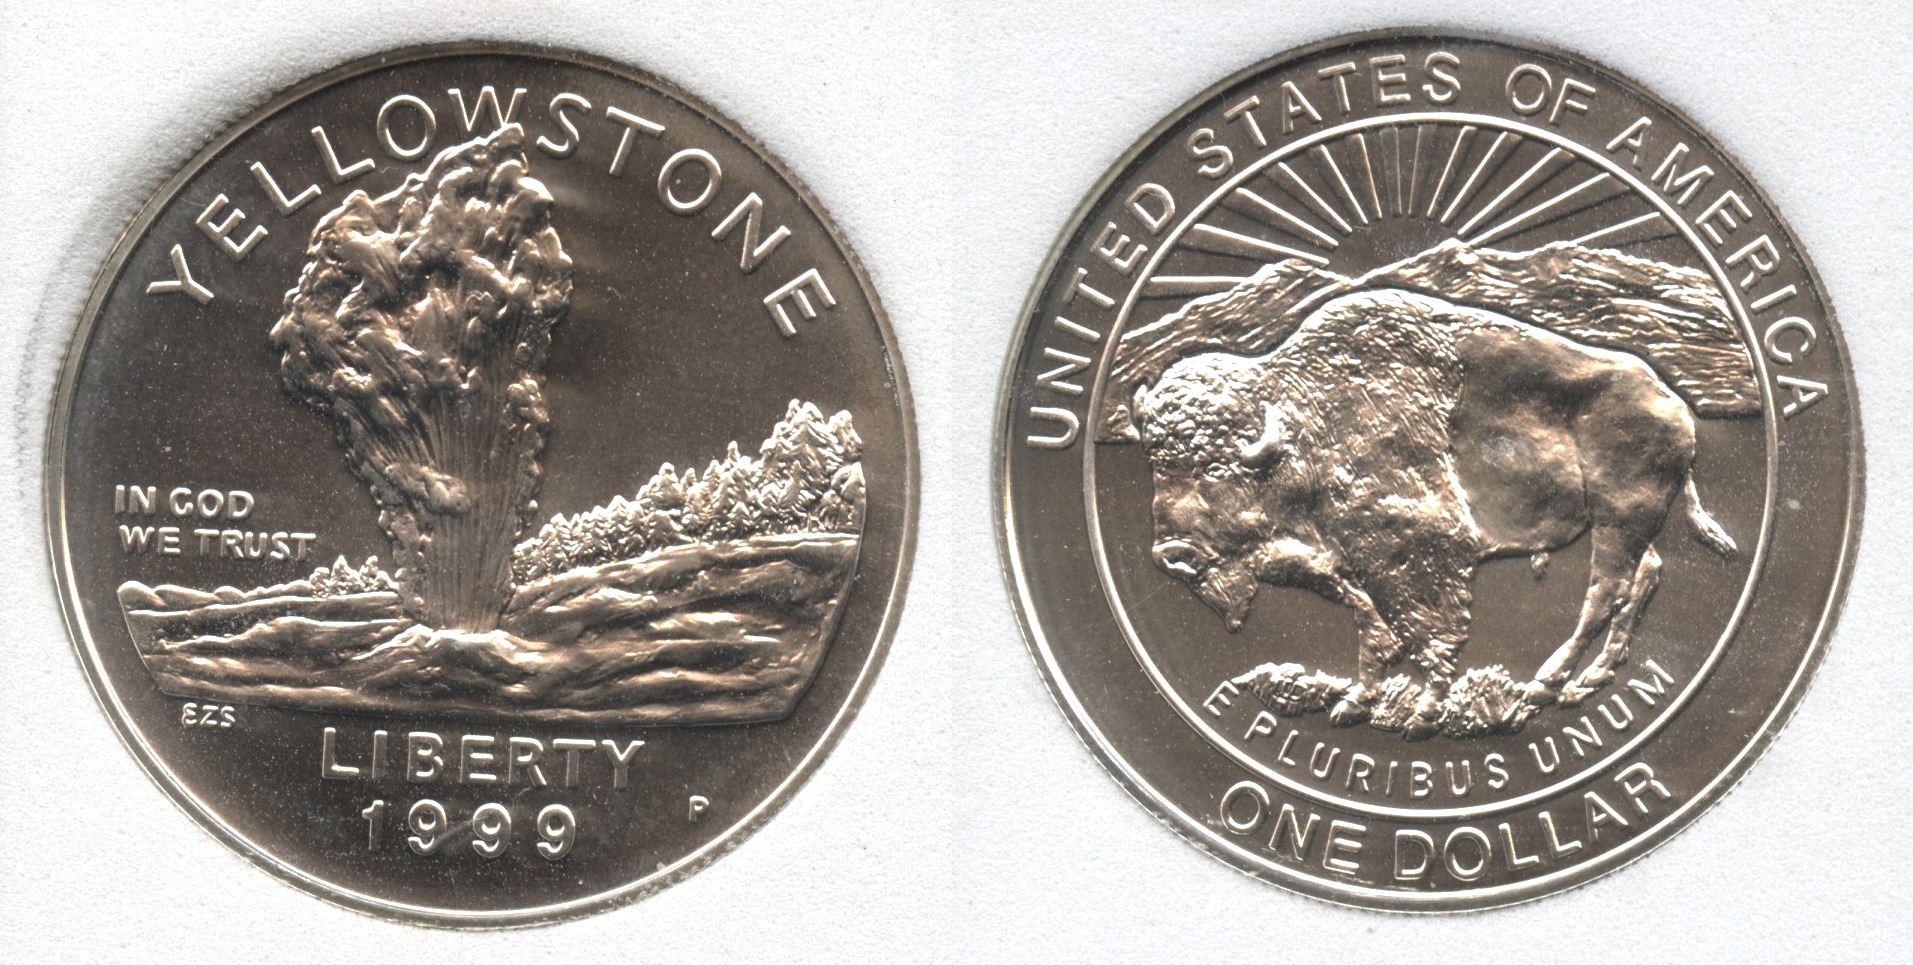 1999-P Yellowstone National Park Commemorative Silver Dollar SGS MS-70 #a